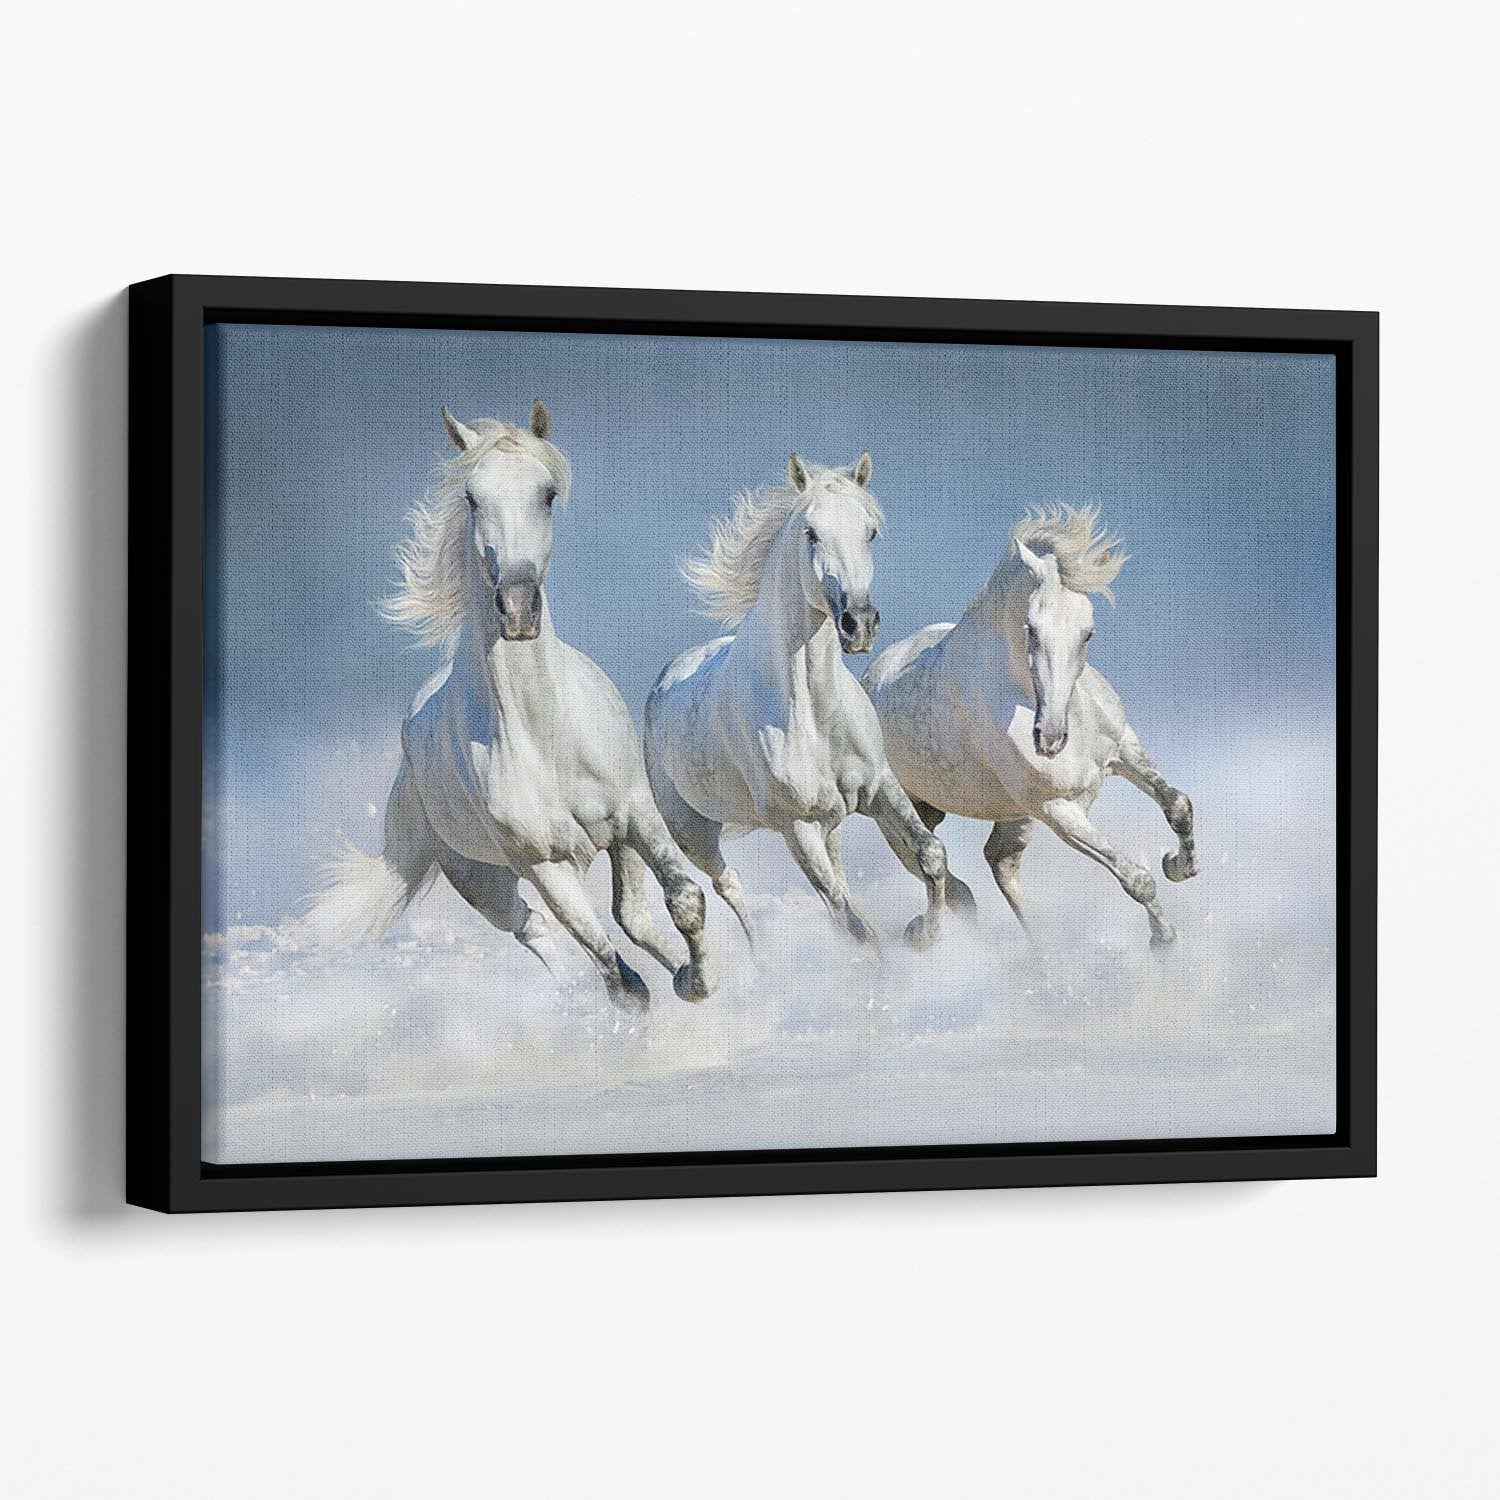 Three white horse run gallop in snow Floating Framed Canvas - Canvas Art Rocks - 1